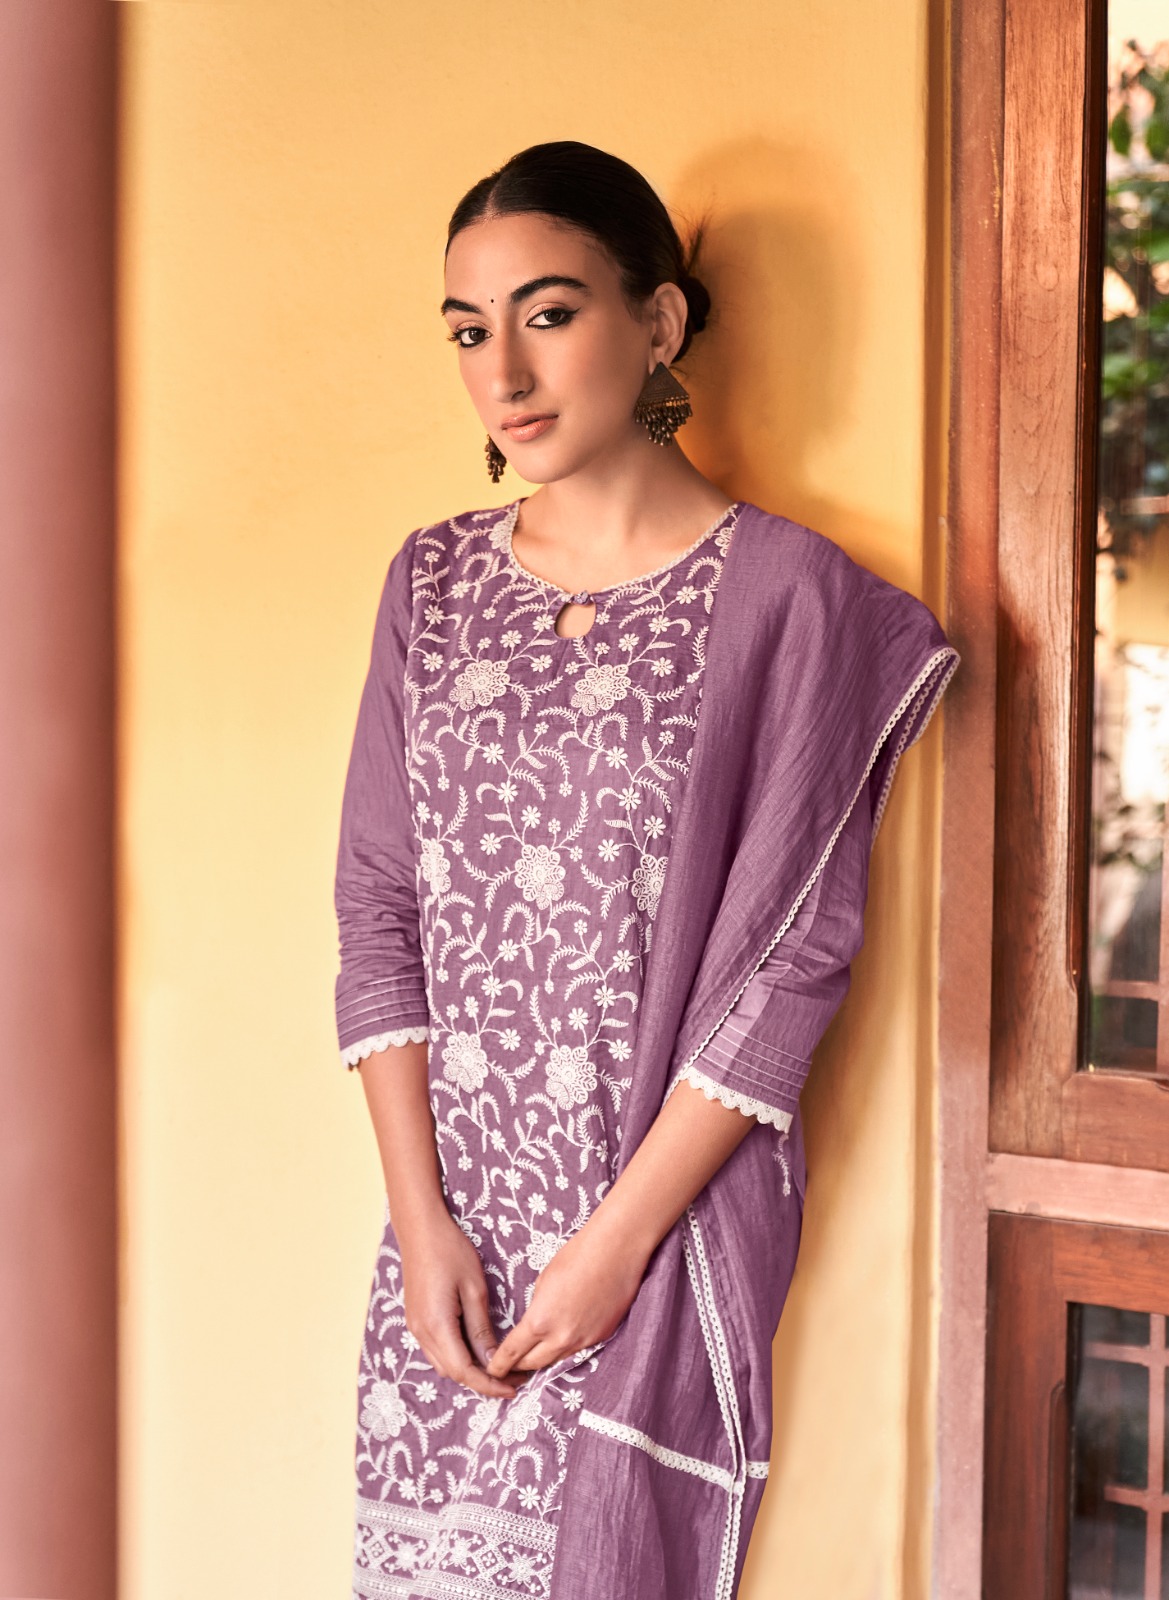 four buttons pearl 8 viscose attrectivelook top bottom with dupatta catalog